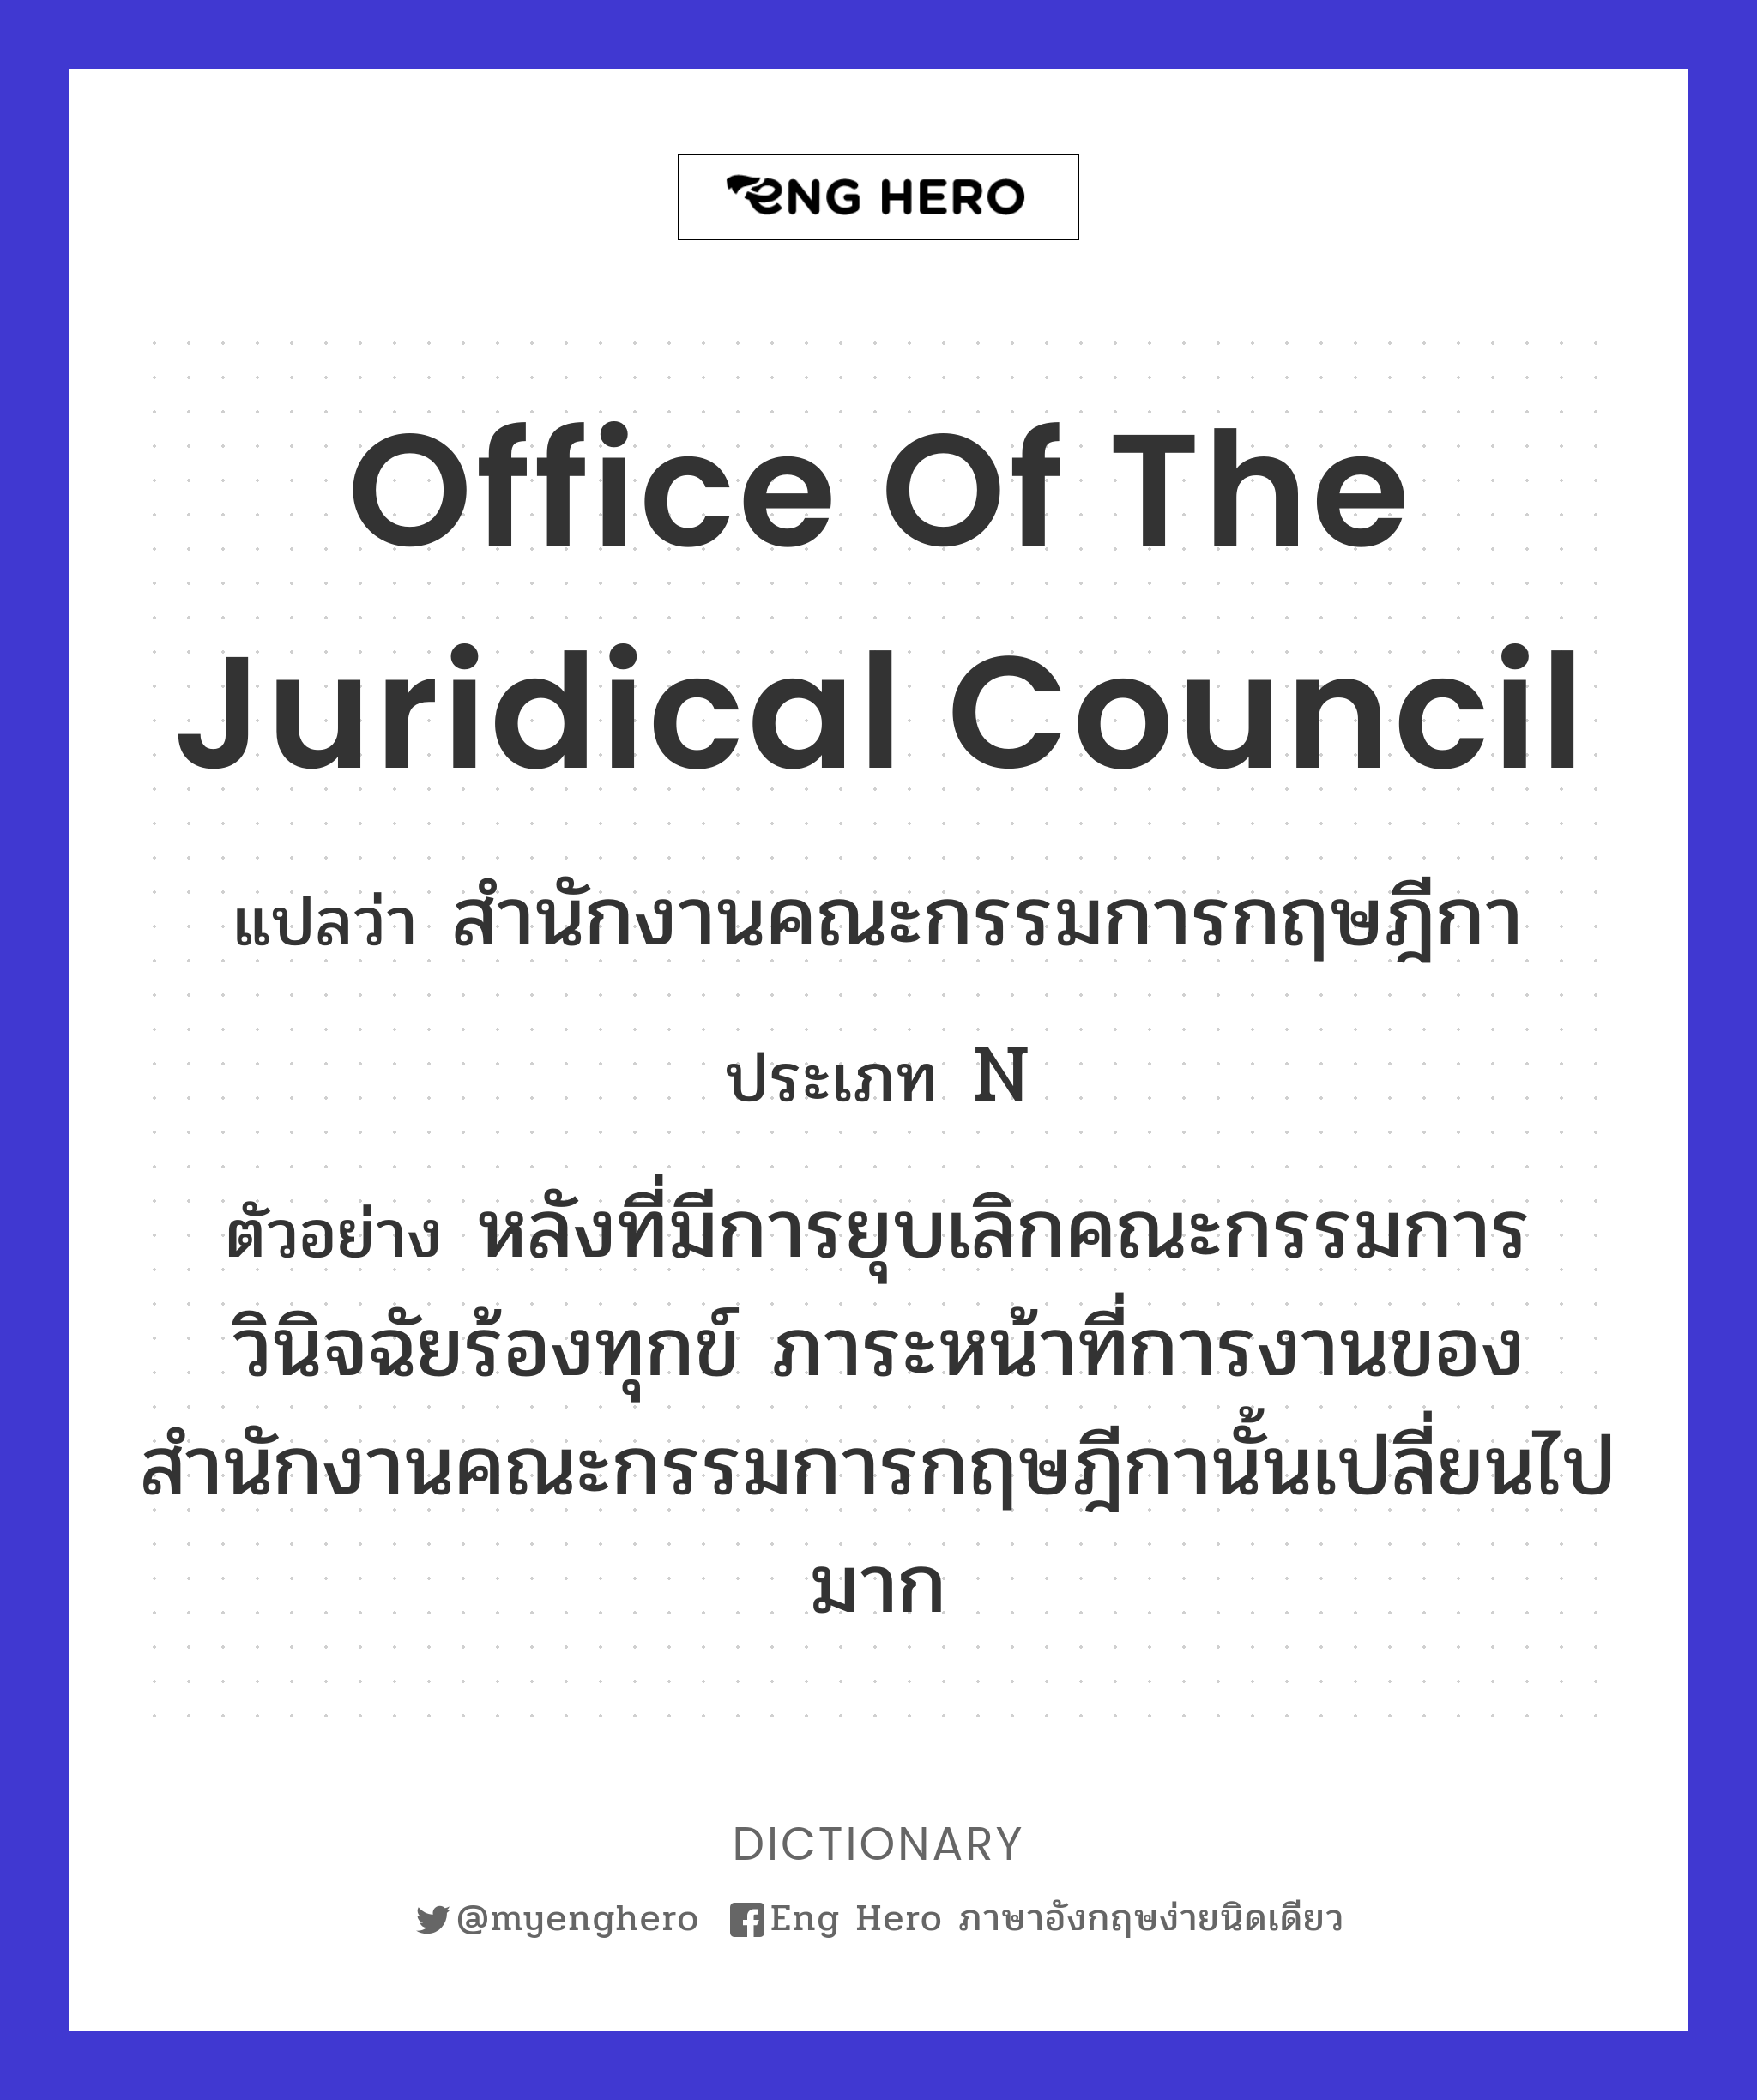 Office of the Juridical Council